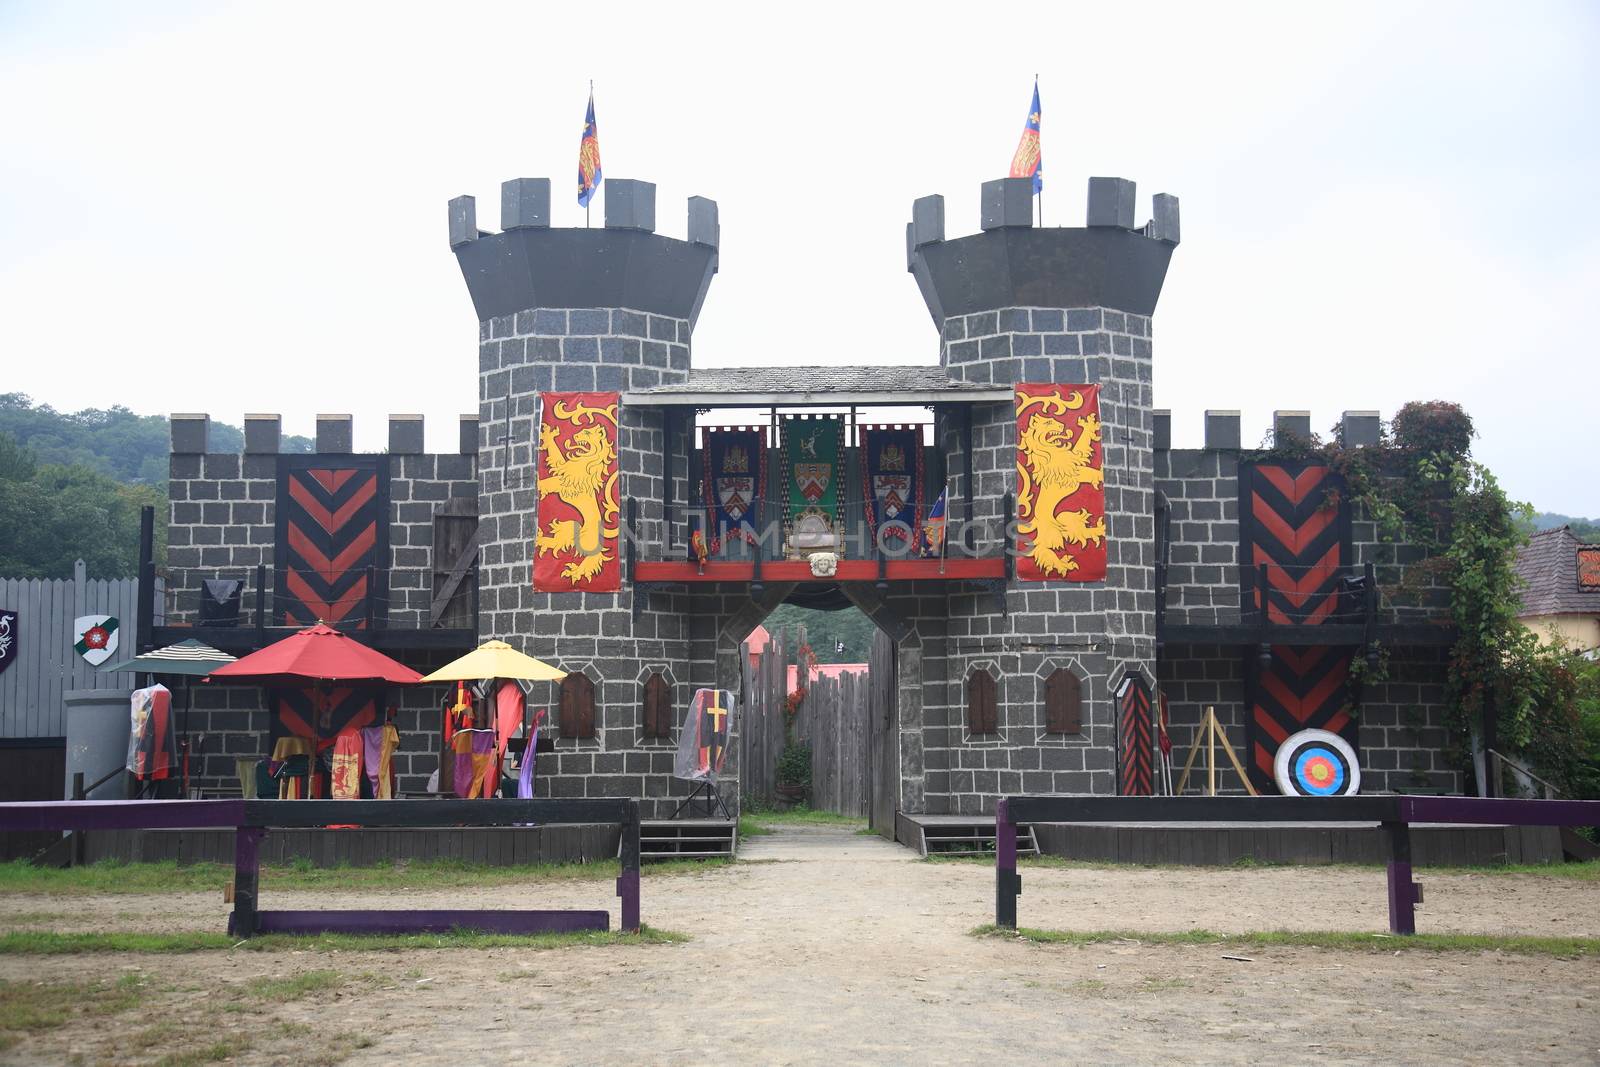 Jousting arena and castle at the New York Renaissance Faire Festival.